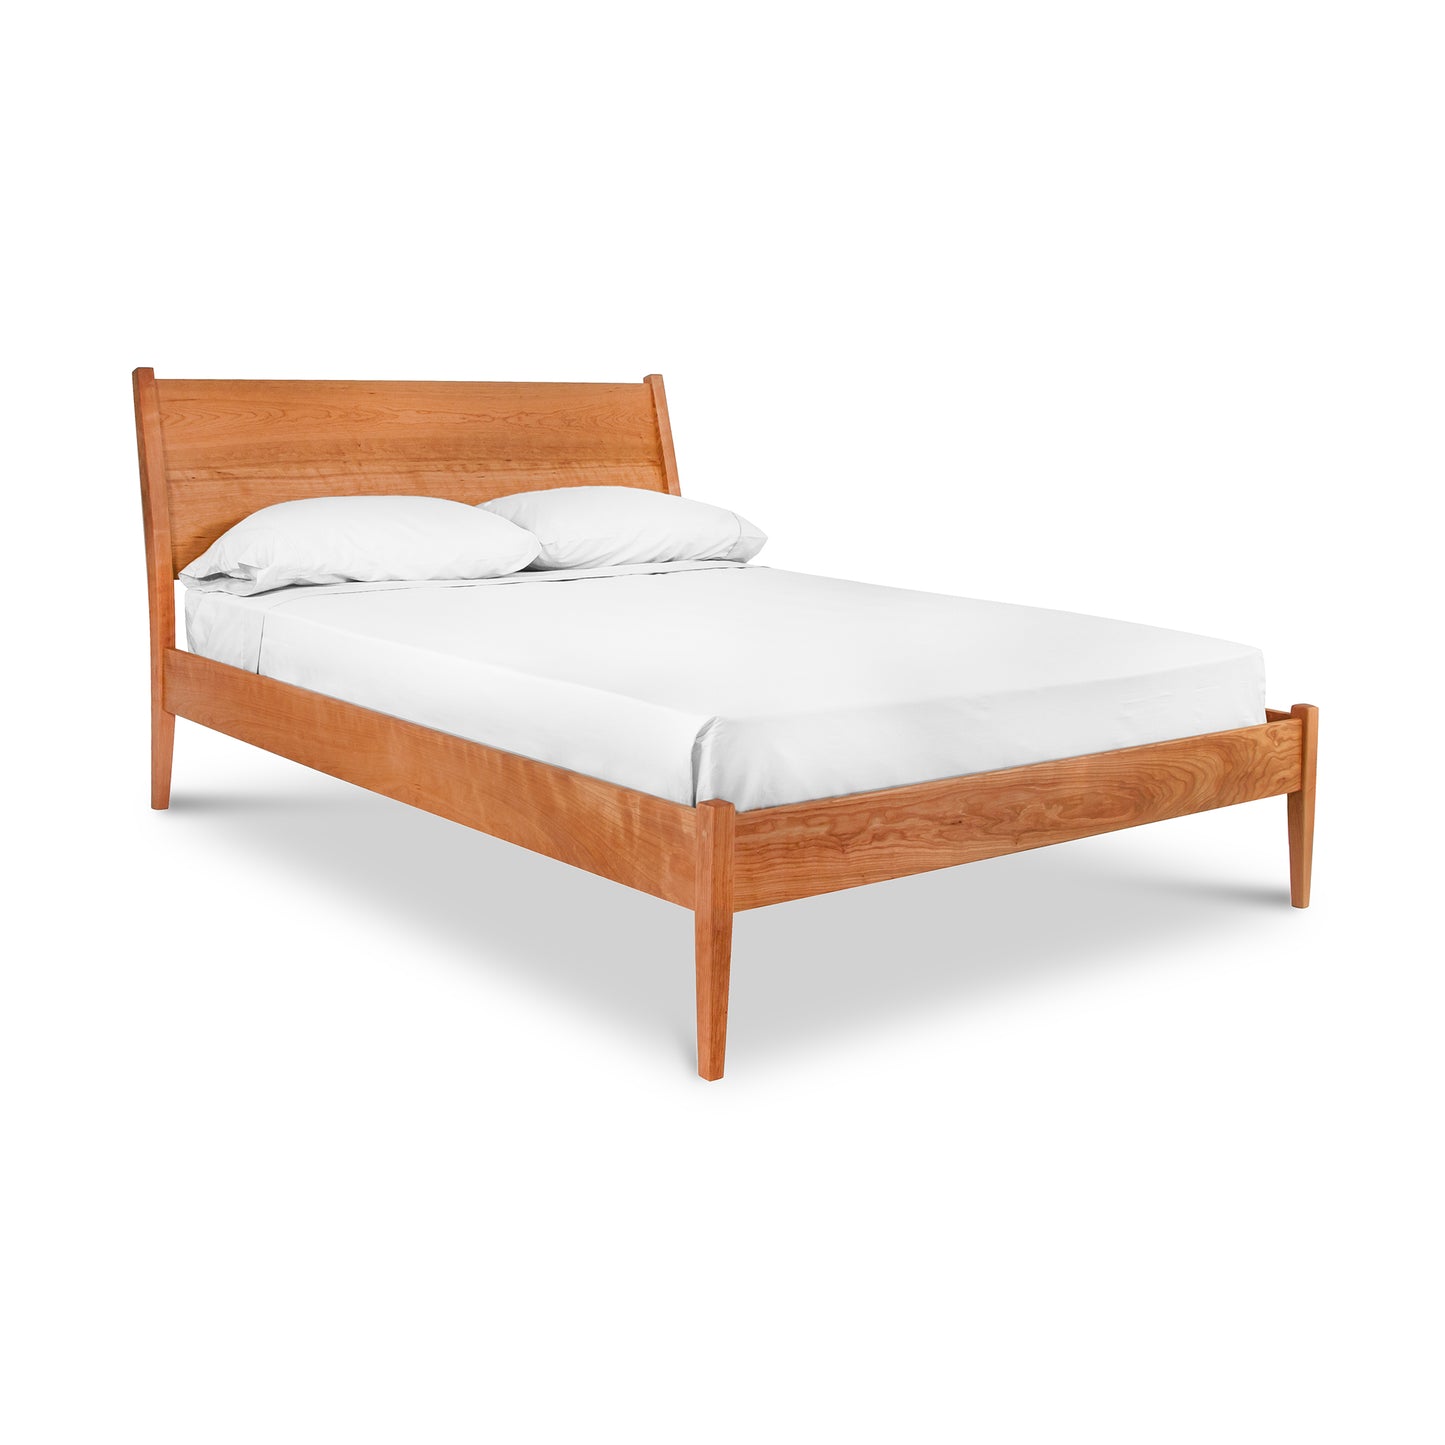 A Maple Corner Woodworks Andover Modern Incline Bed with a simple, modern design featuring a slanted headboard, supporting a white mattress and two pillows. The bed is set against a plain white background.